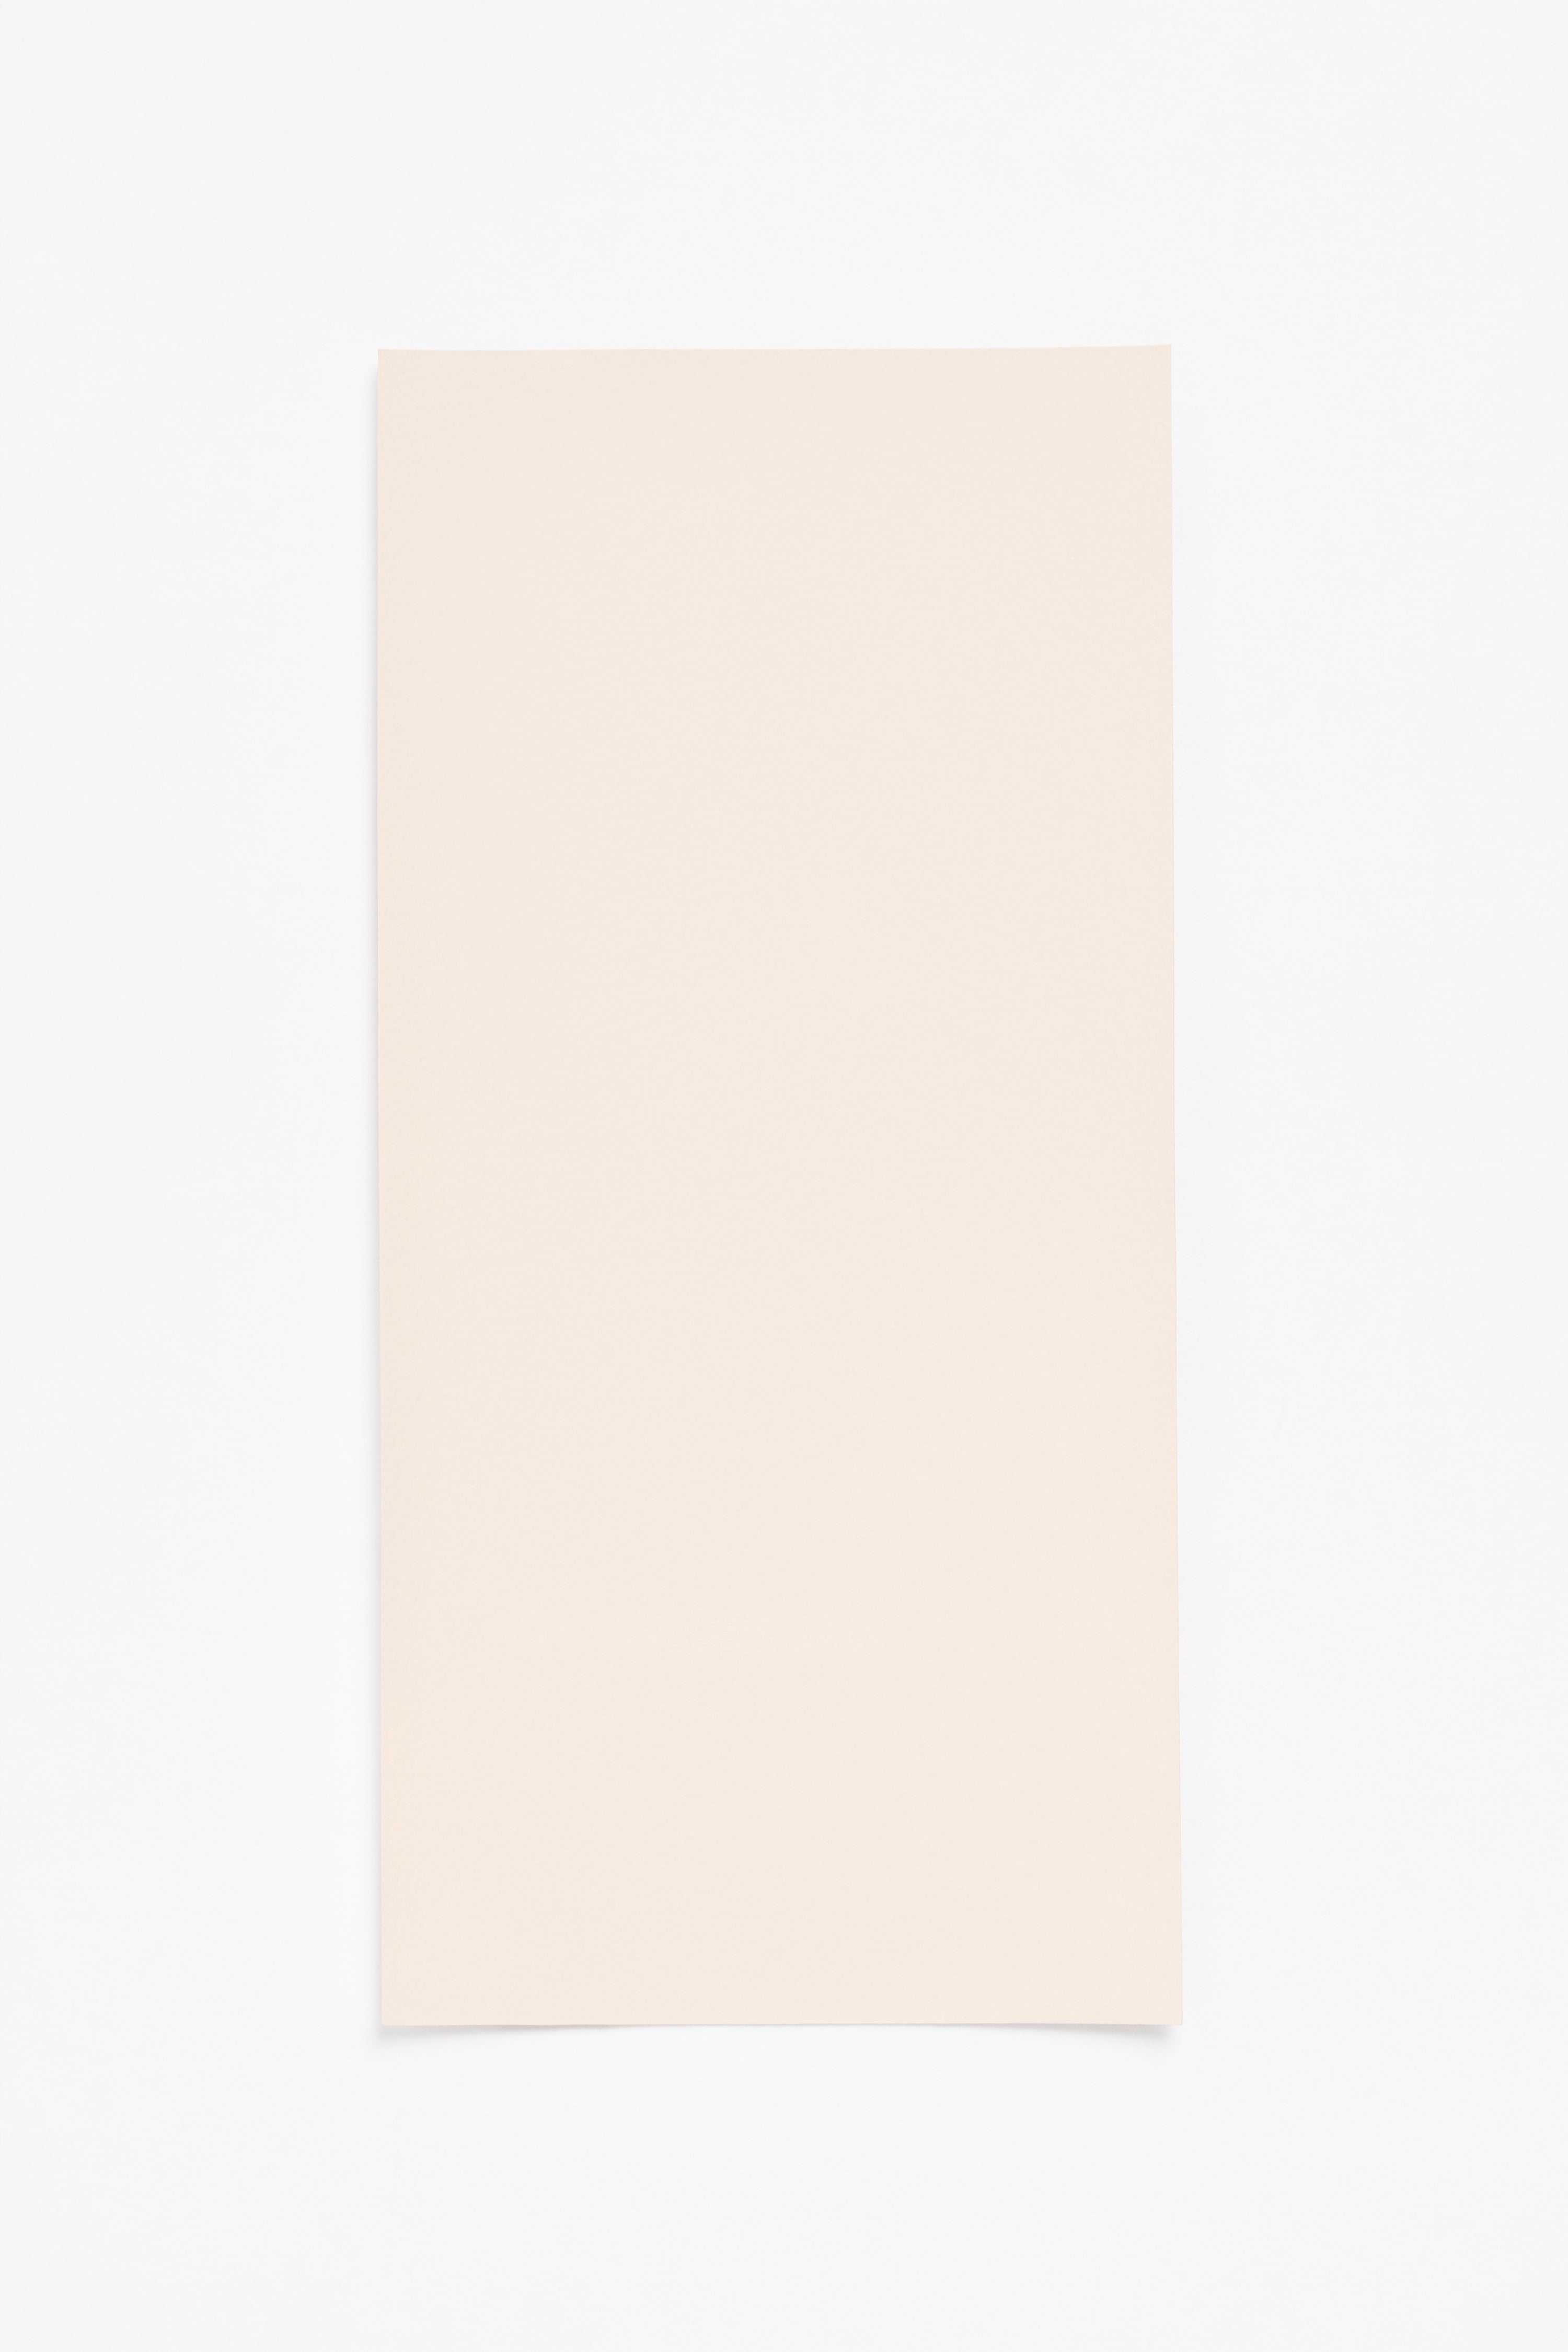 Nude — a paint colour developed by Halleroed for Blēo